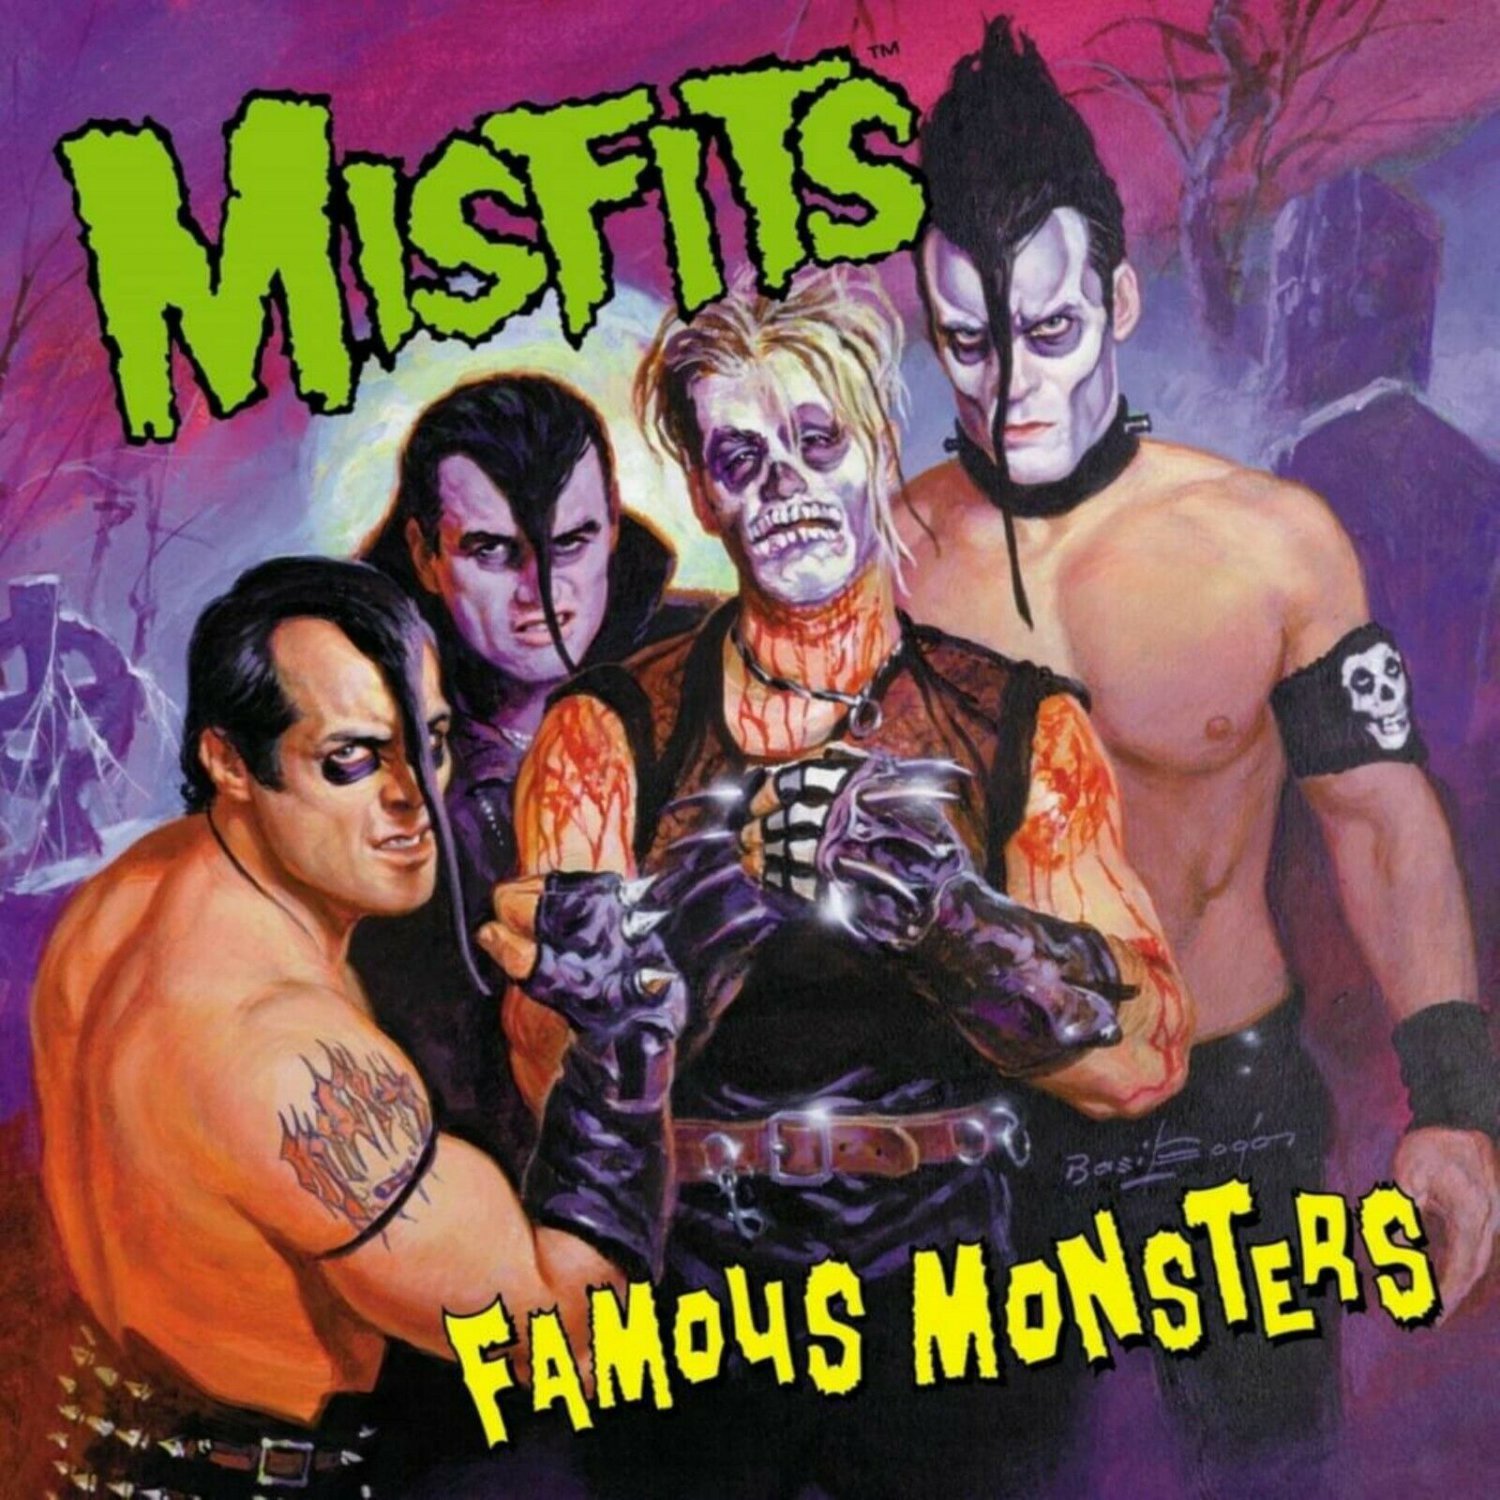 MISFITS Famous Monsters BANNER Huge 4X4 Ft Fabric Poster Tapestry Flag Print album cover art